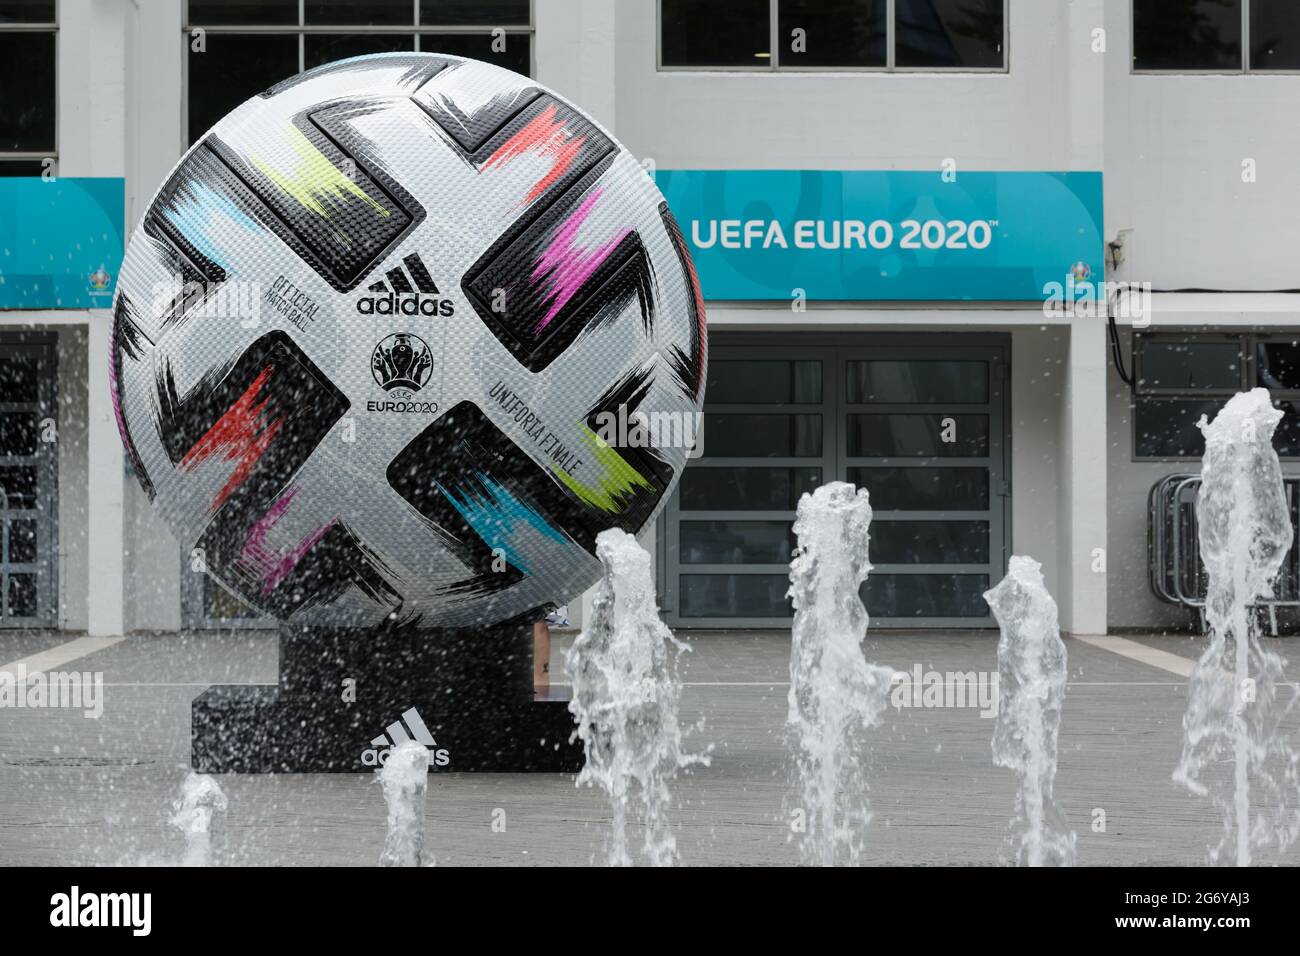 Wembley Wembley Park, UK. 9th July 2021. A giant replica Adidas 'UNIFORIA FINALE' football - the official match ball for finals - on display in Arena Square. 60,000 fans